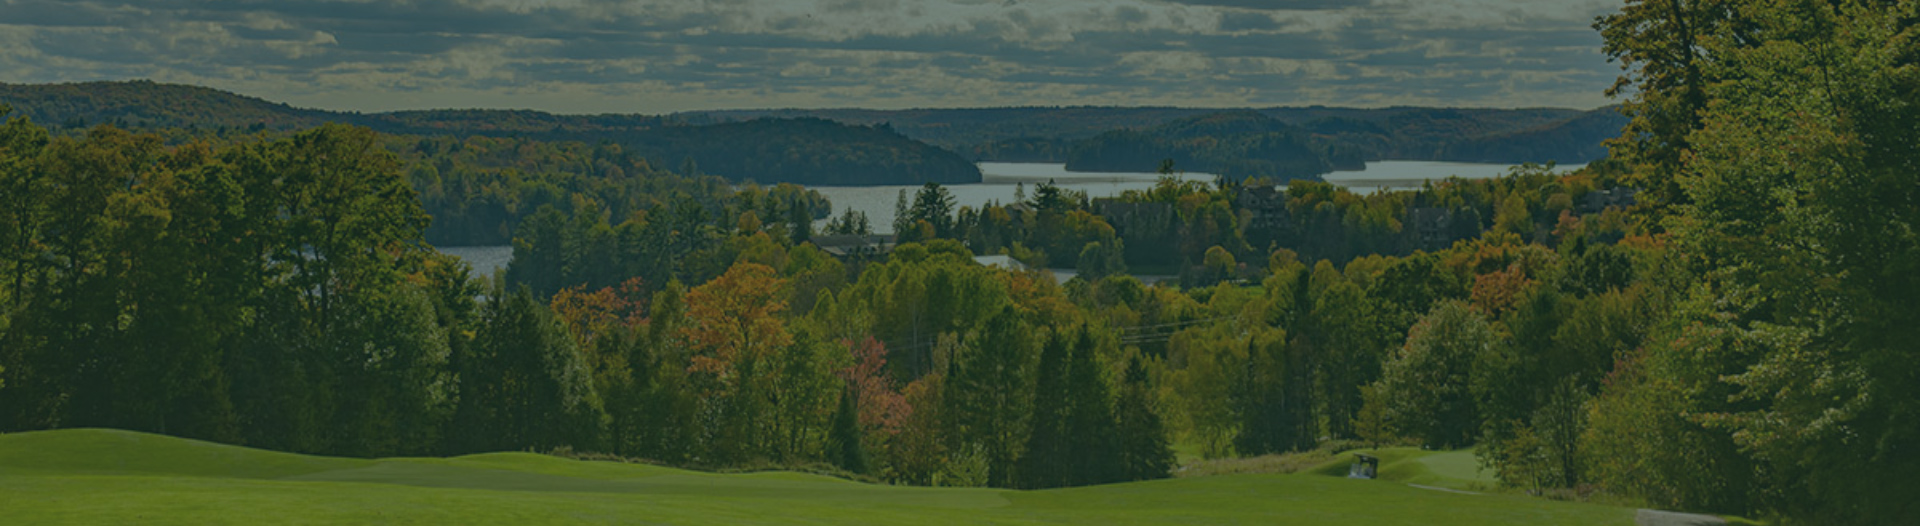 View of trees and lake in distance from a golf hole